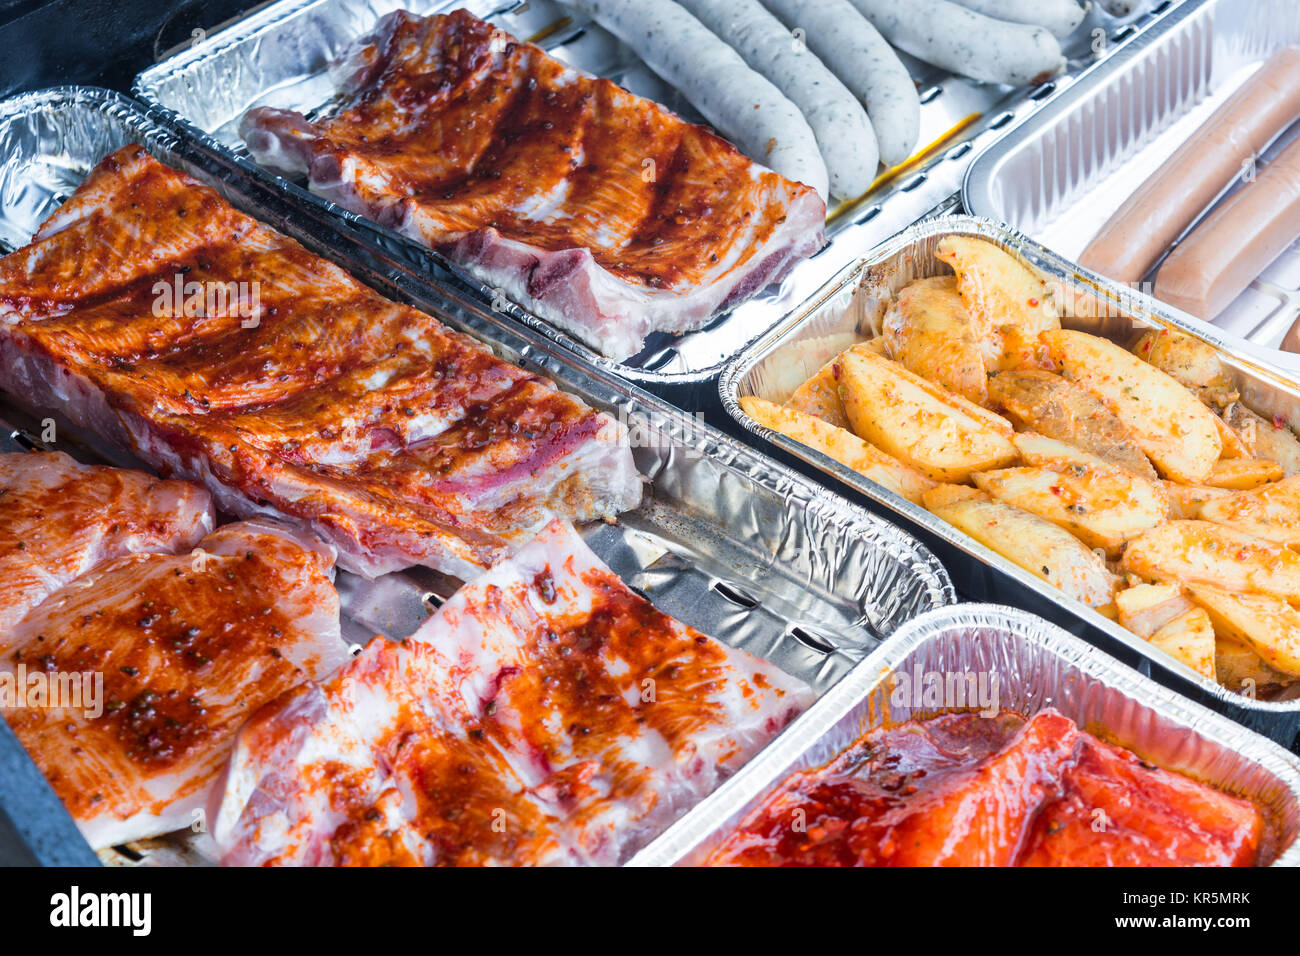 different kinds of meat and grilled sausage Stock Photo